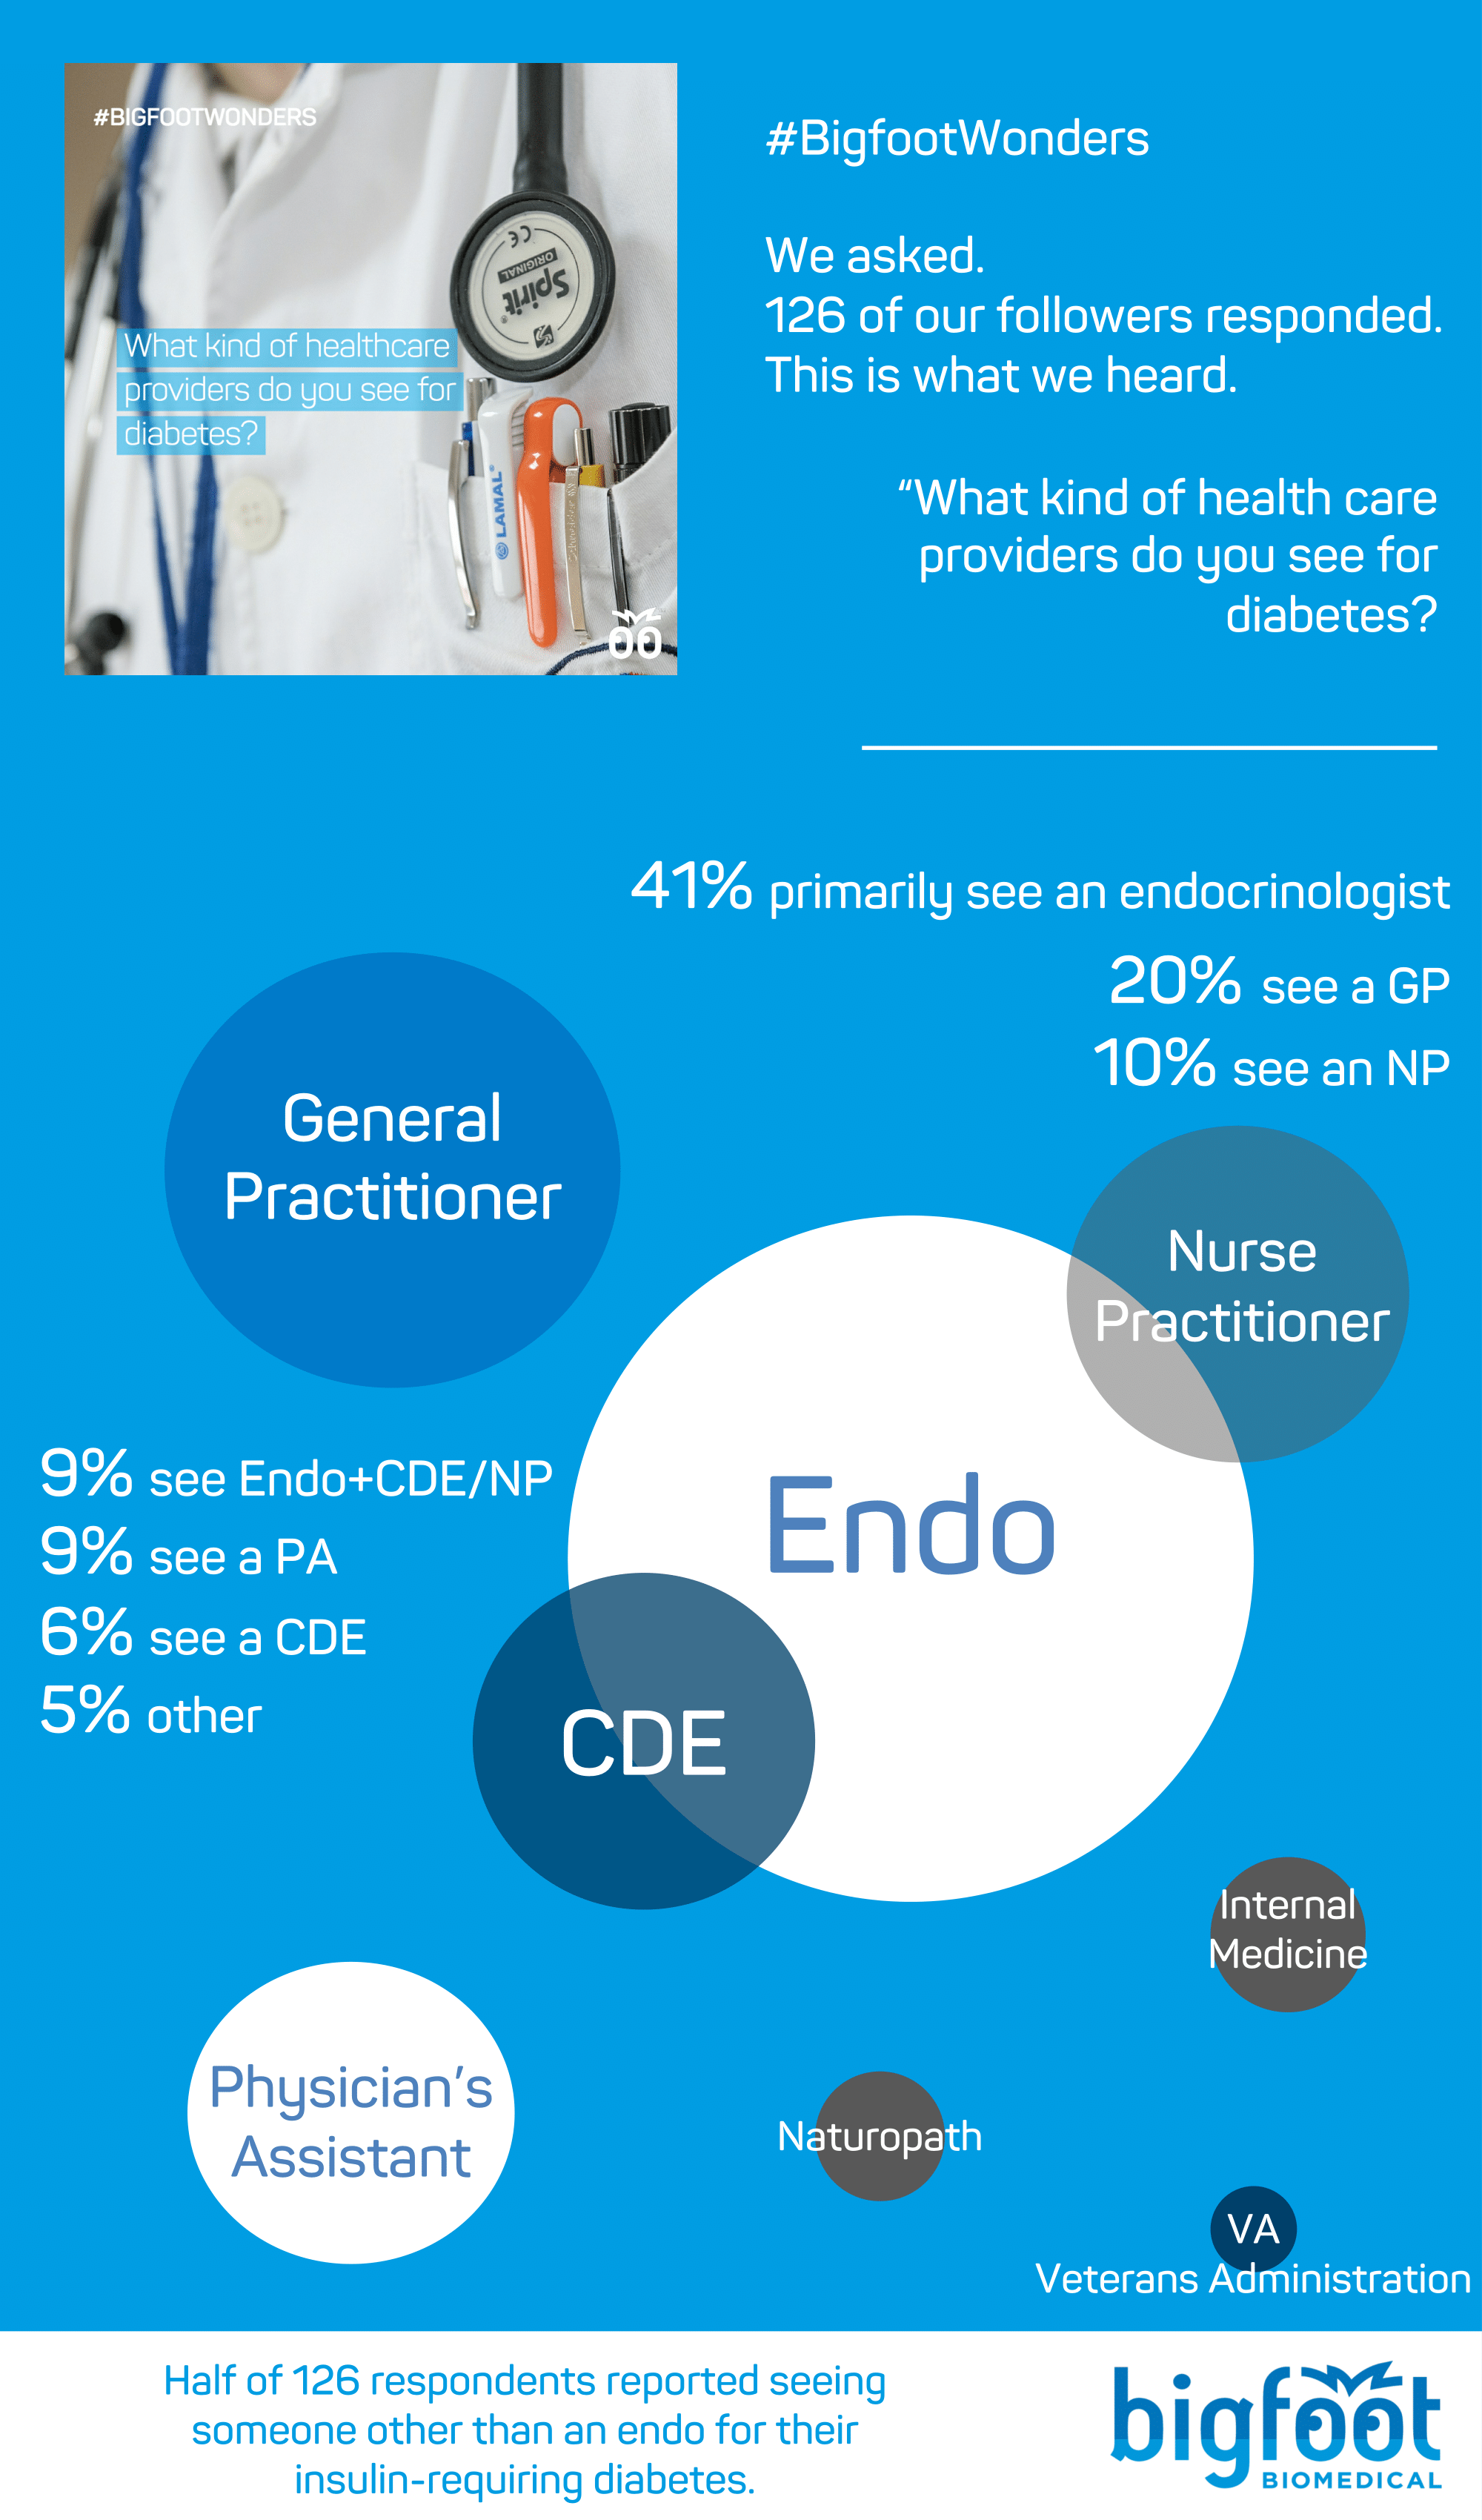 50% said that they see an endo, with 41% saying primarily endo, 6+% saying Endo+CDE, and 2+% saying Endo+NP. 20% of our respondents said they see a GP 10% said only NP 9% said PA 6% said only CDE 1 person mentioned the VA, 3 people mentioned internal medicine, 2 people mentioned that their naturopath writes their insulin Rx